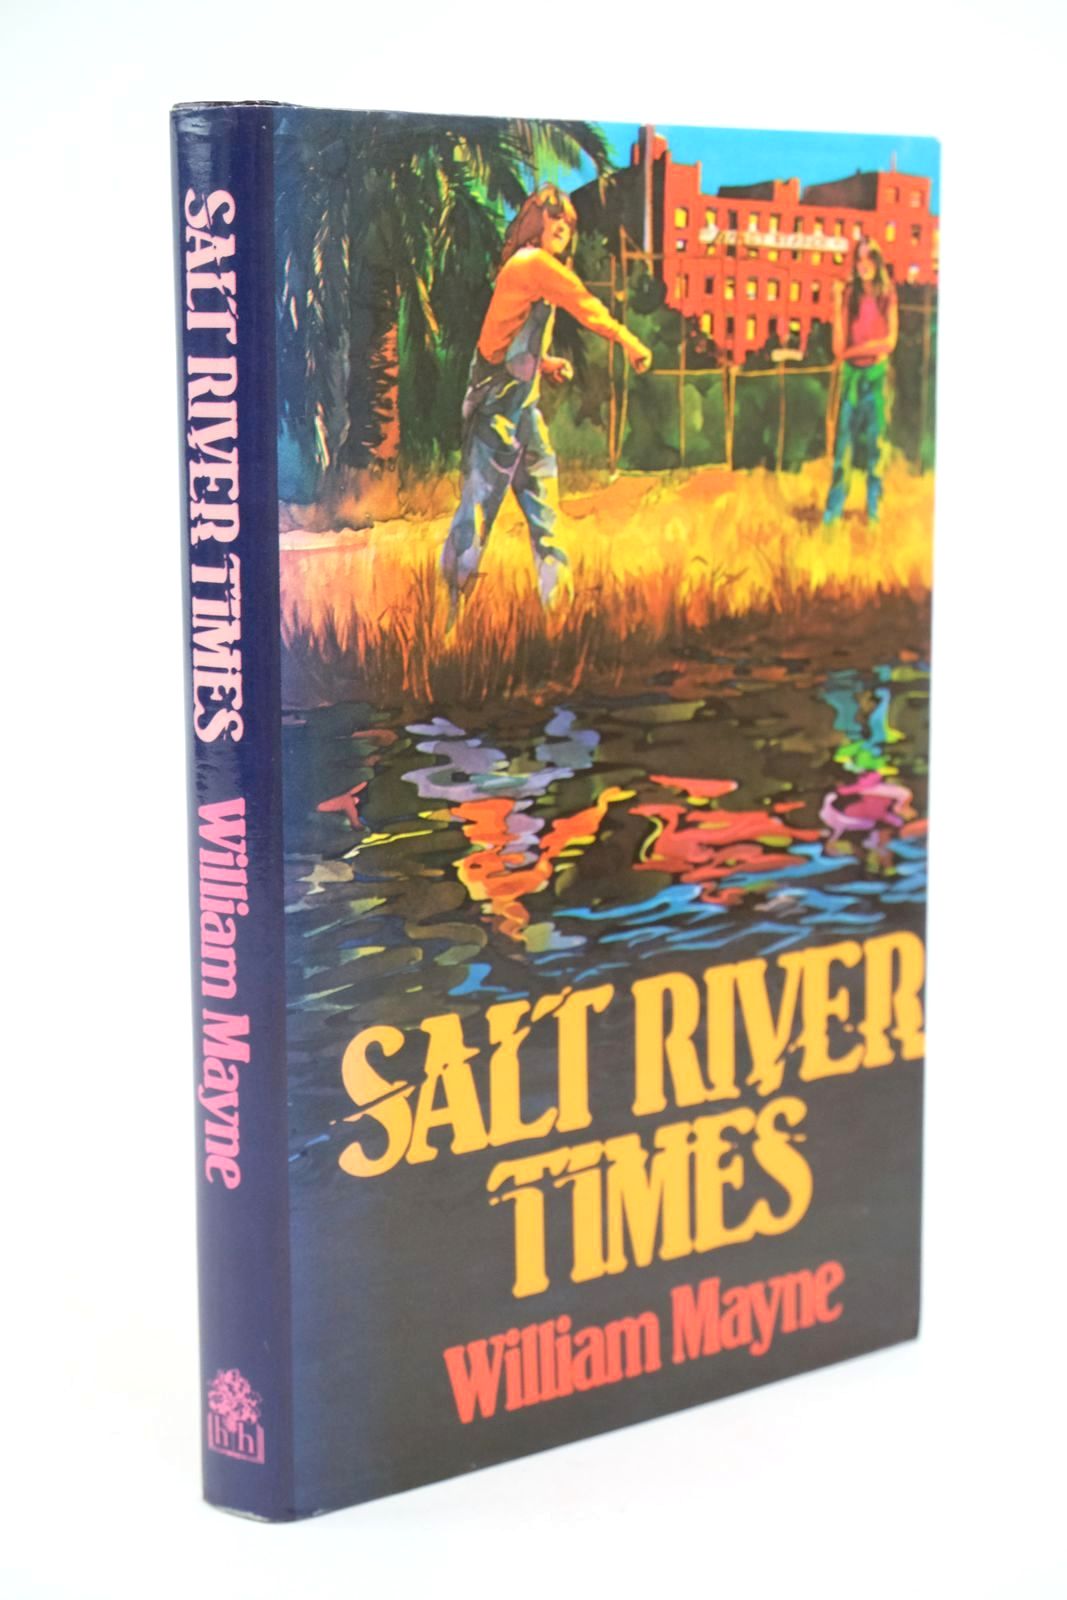 Photo of SALT RIVER TIMES written by Mayne, William illustrated by Honey, Elizabeth published by Hamish Hamilton Childrens Books (STOCK CODE: 1323108)  for sale by Stella & Rose's Books